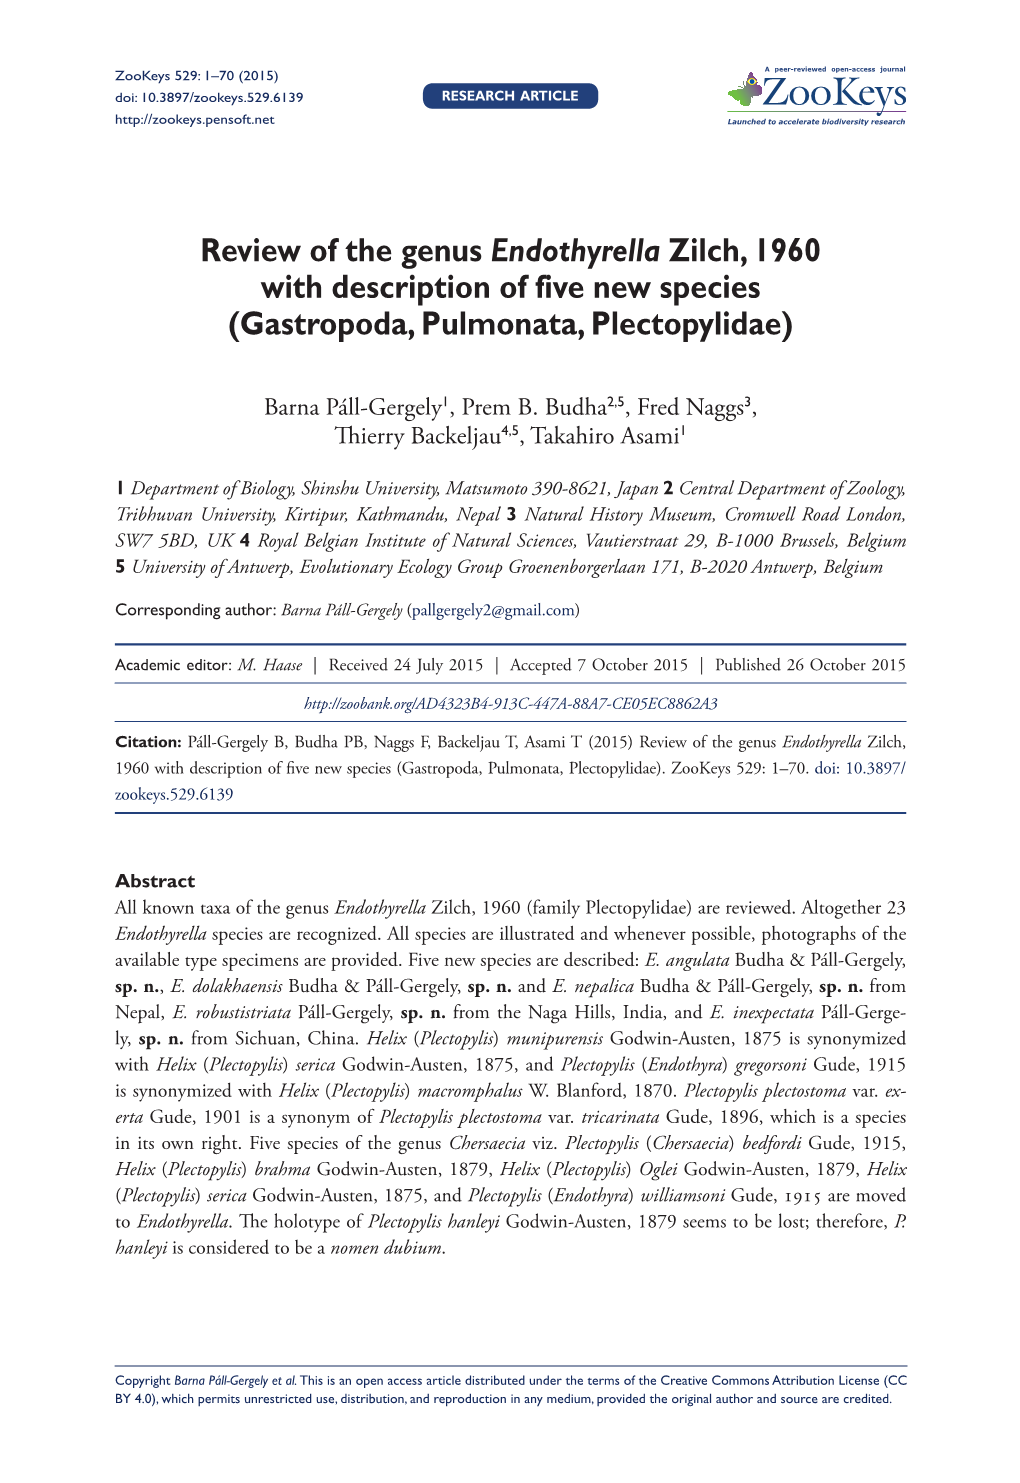 ﻿Review of the Genus Endothyrella Zilch, 1960 with Description of Five